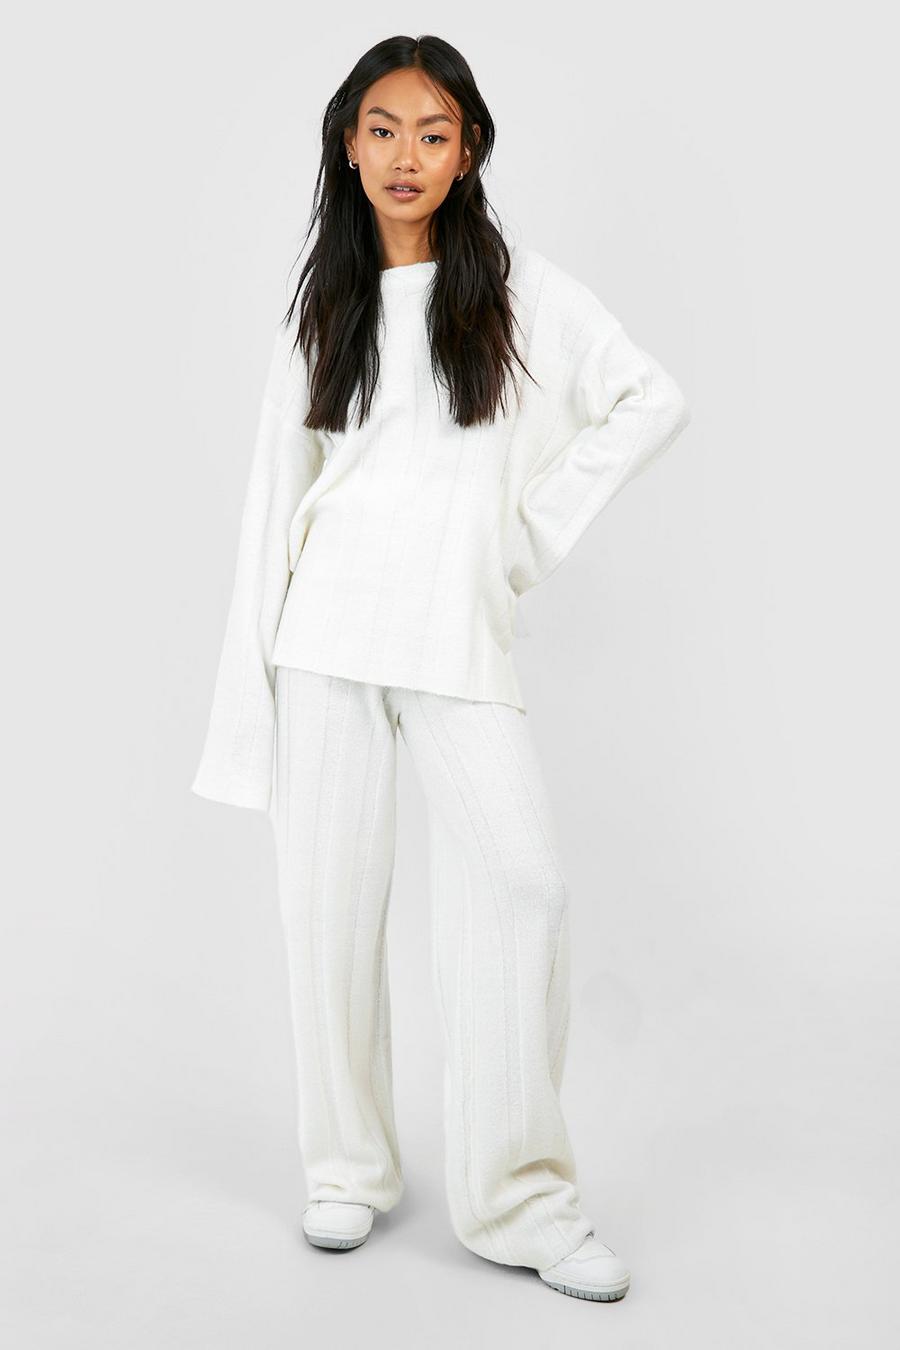 Ecru Soft Knit Wide Rib Jumper And Flares Knitted Co-ord